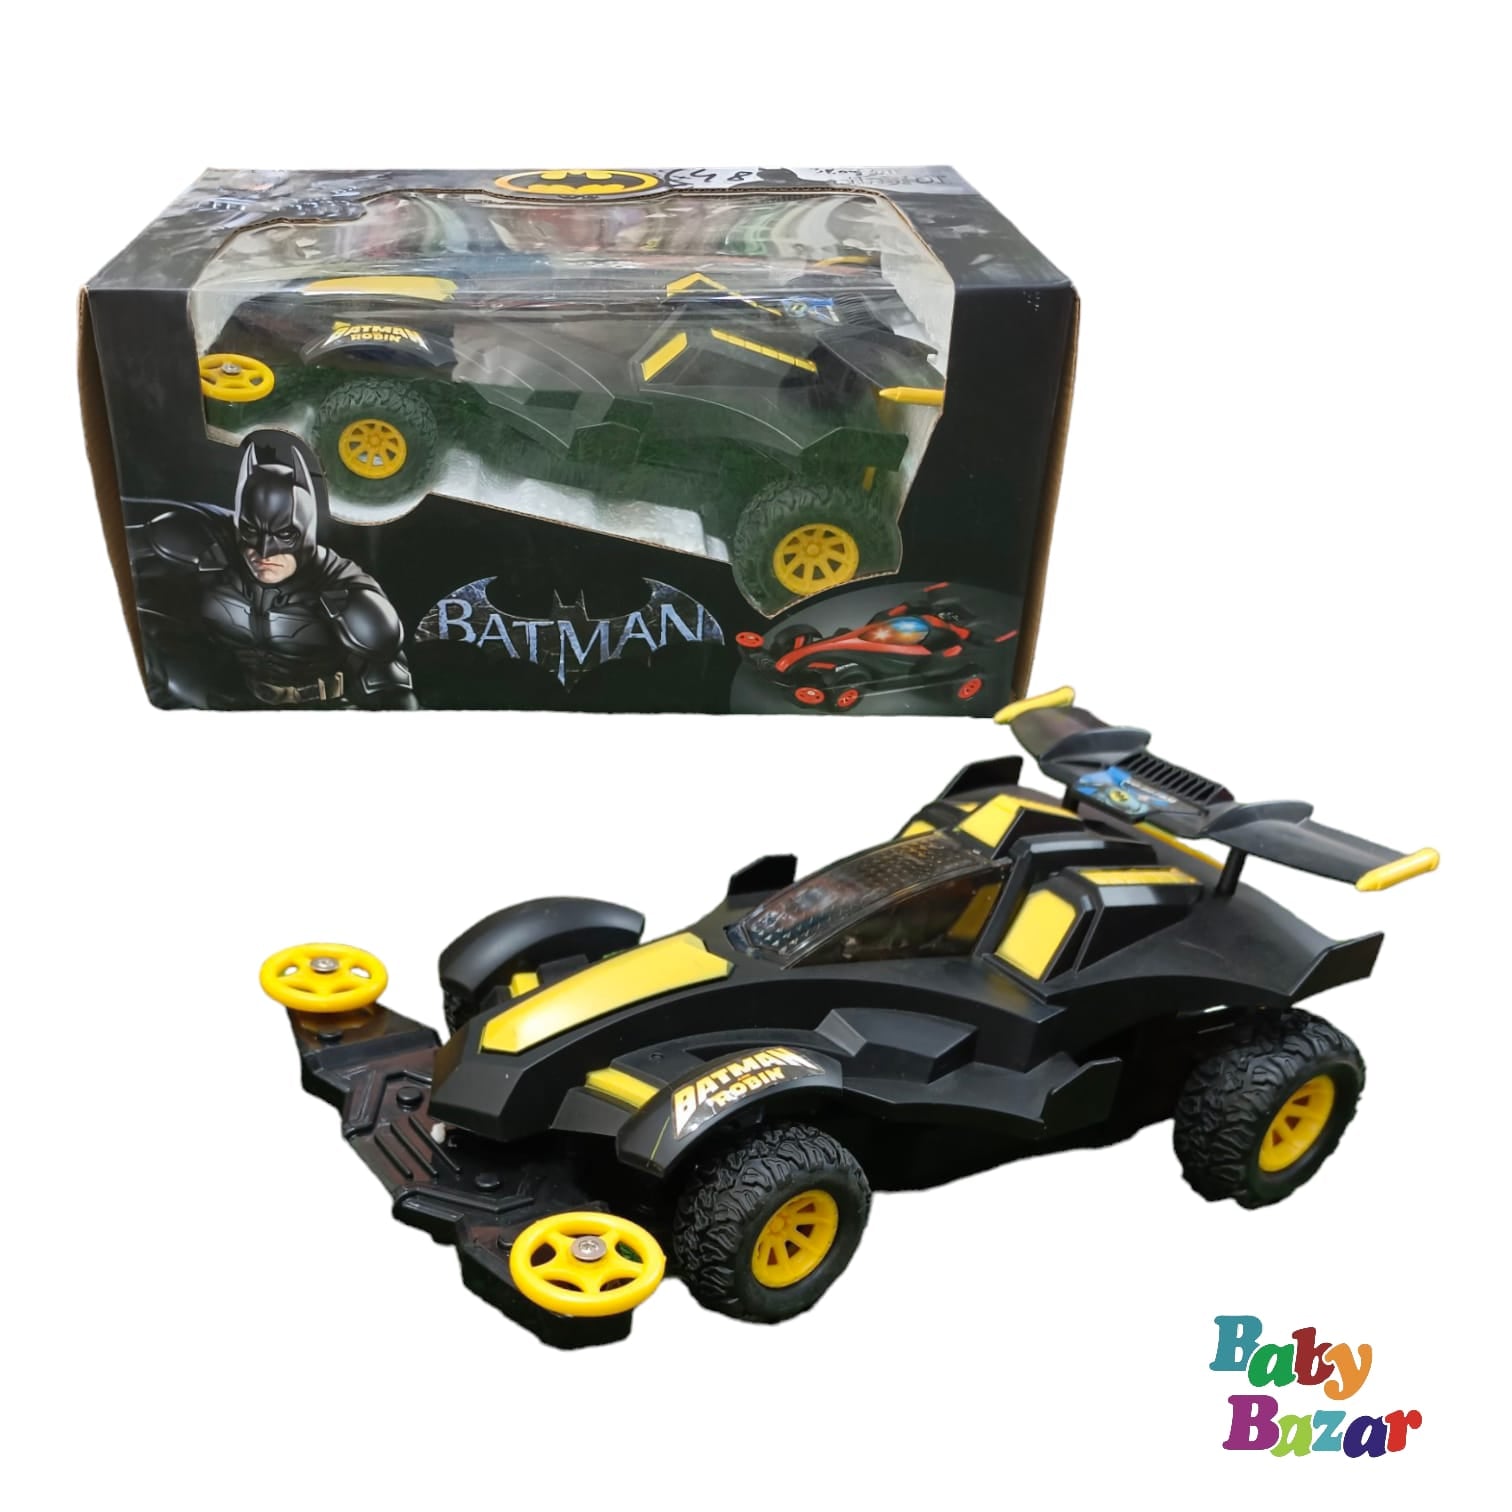 Batman Car With Remote Control 803bm - Black and yellow